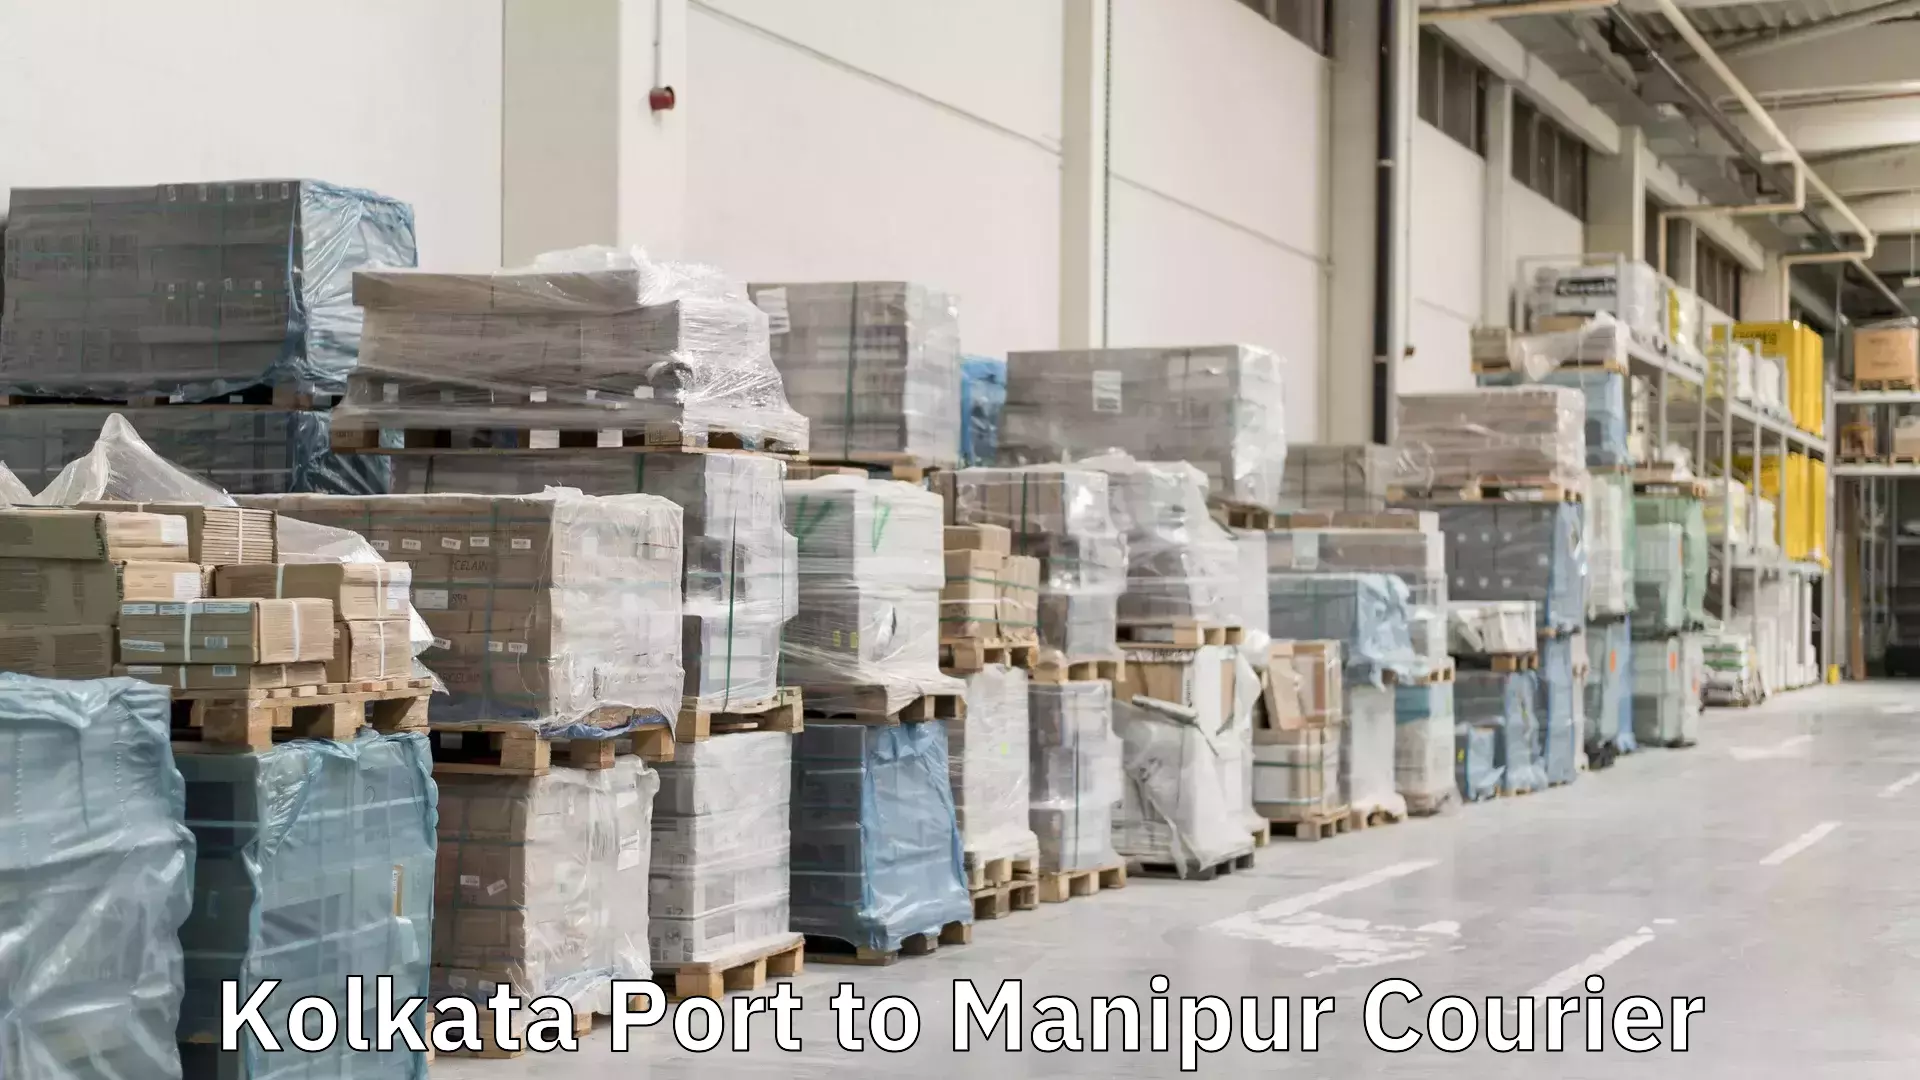 Same-day delivery solutions Kolkata Port to Manipur